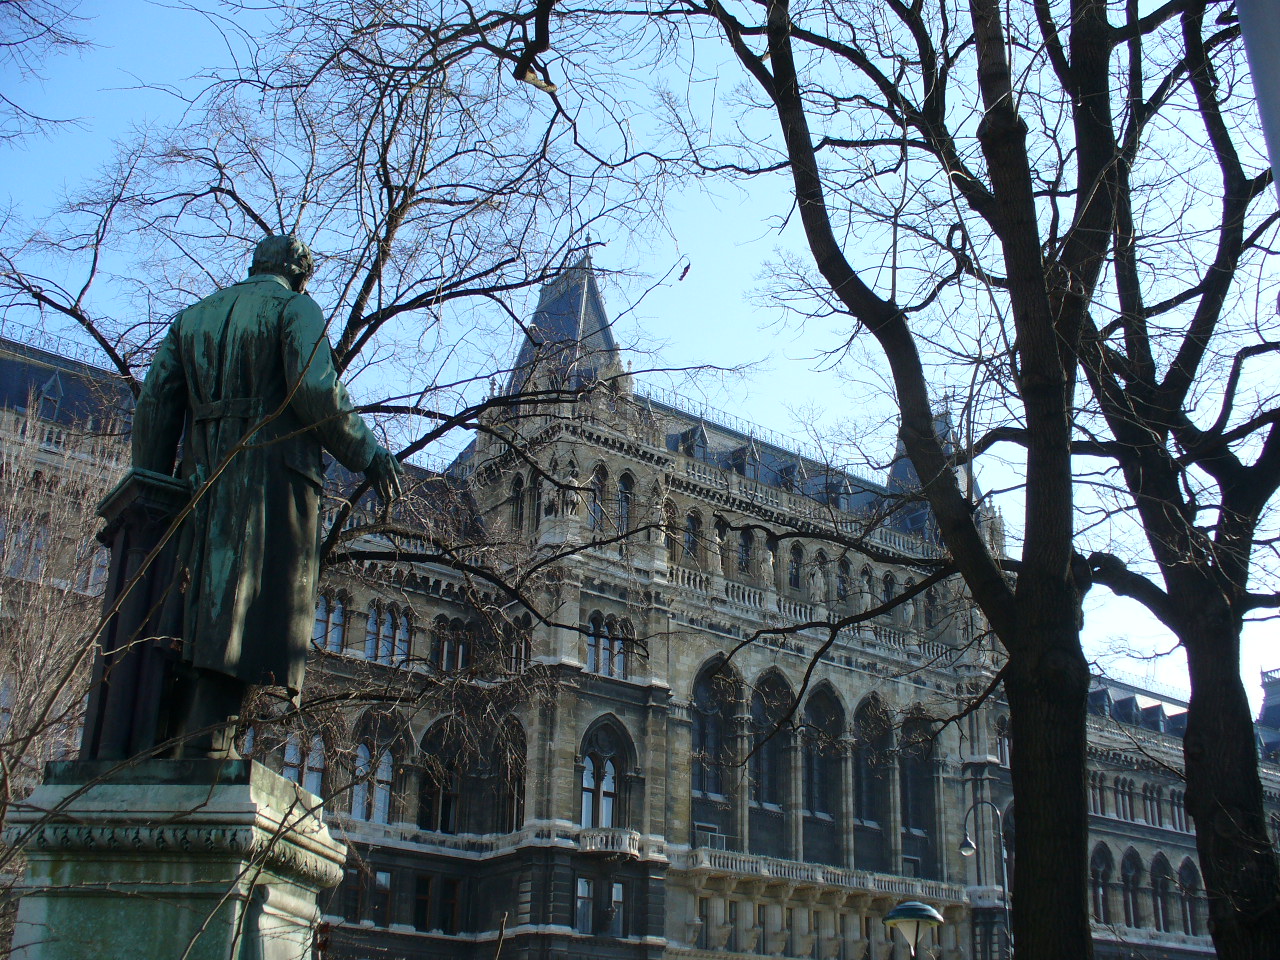 a statue of a man is in the foreground, with old buildings in the background